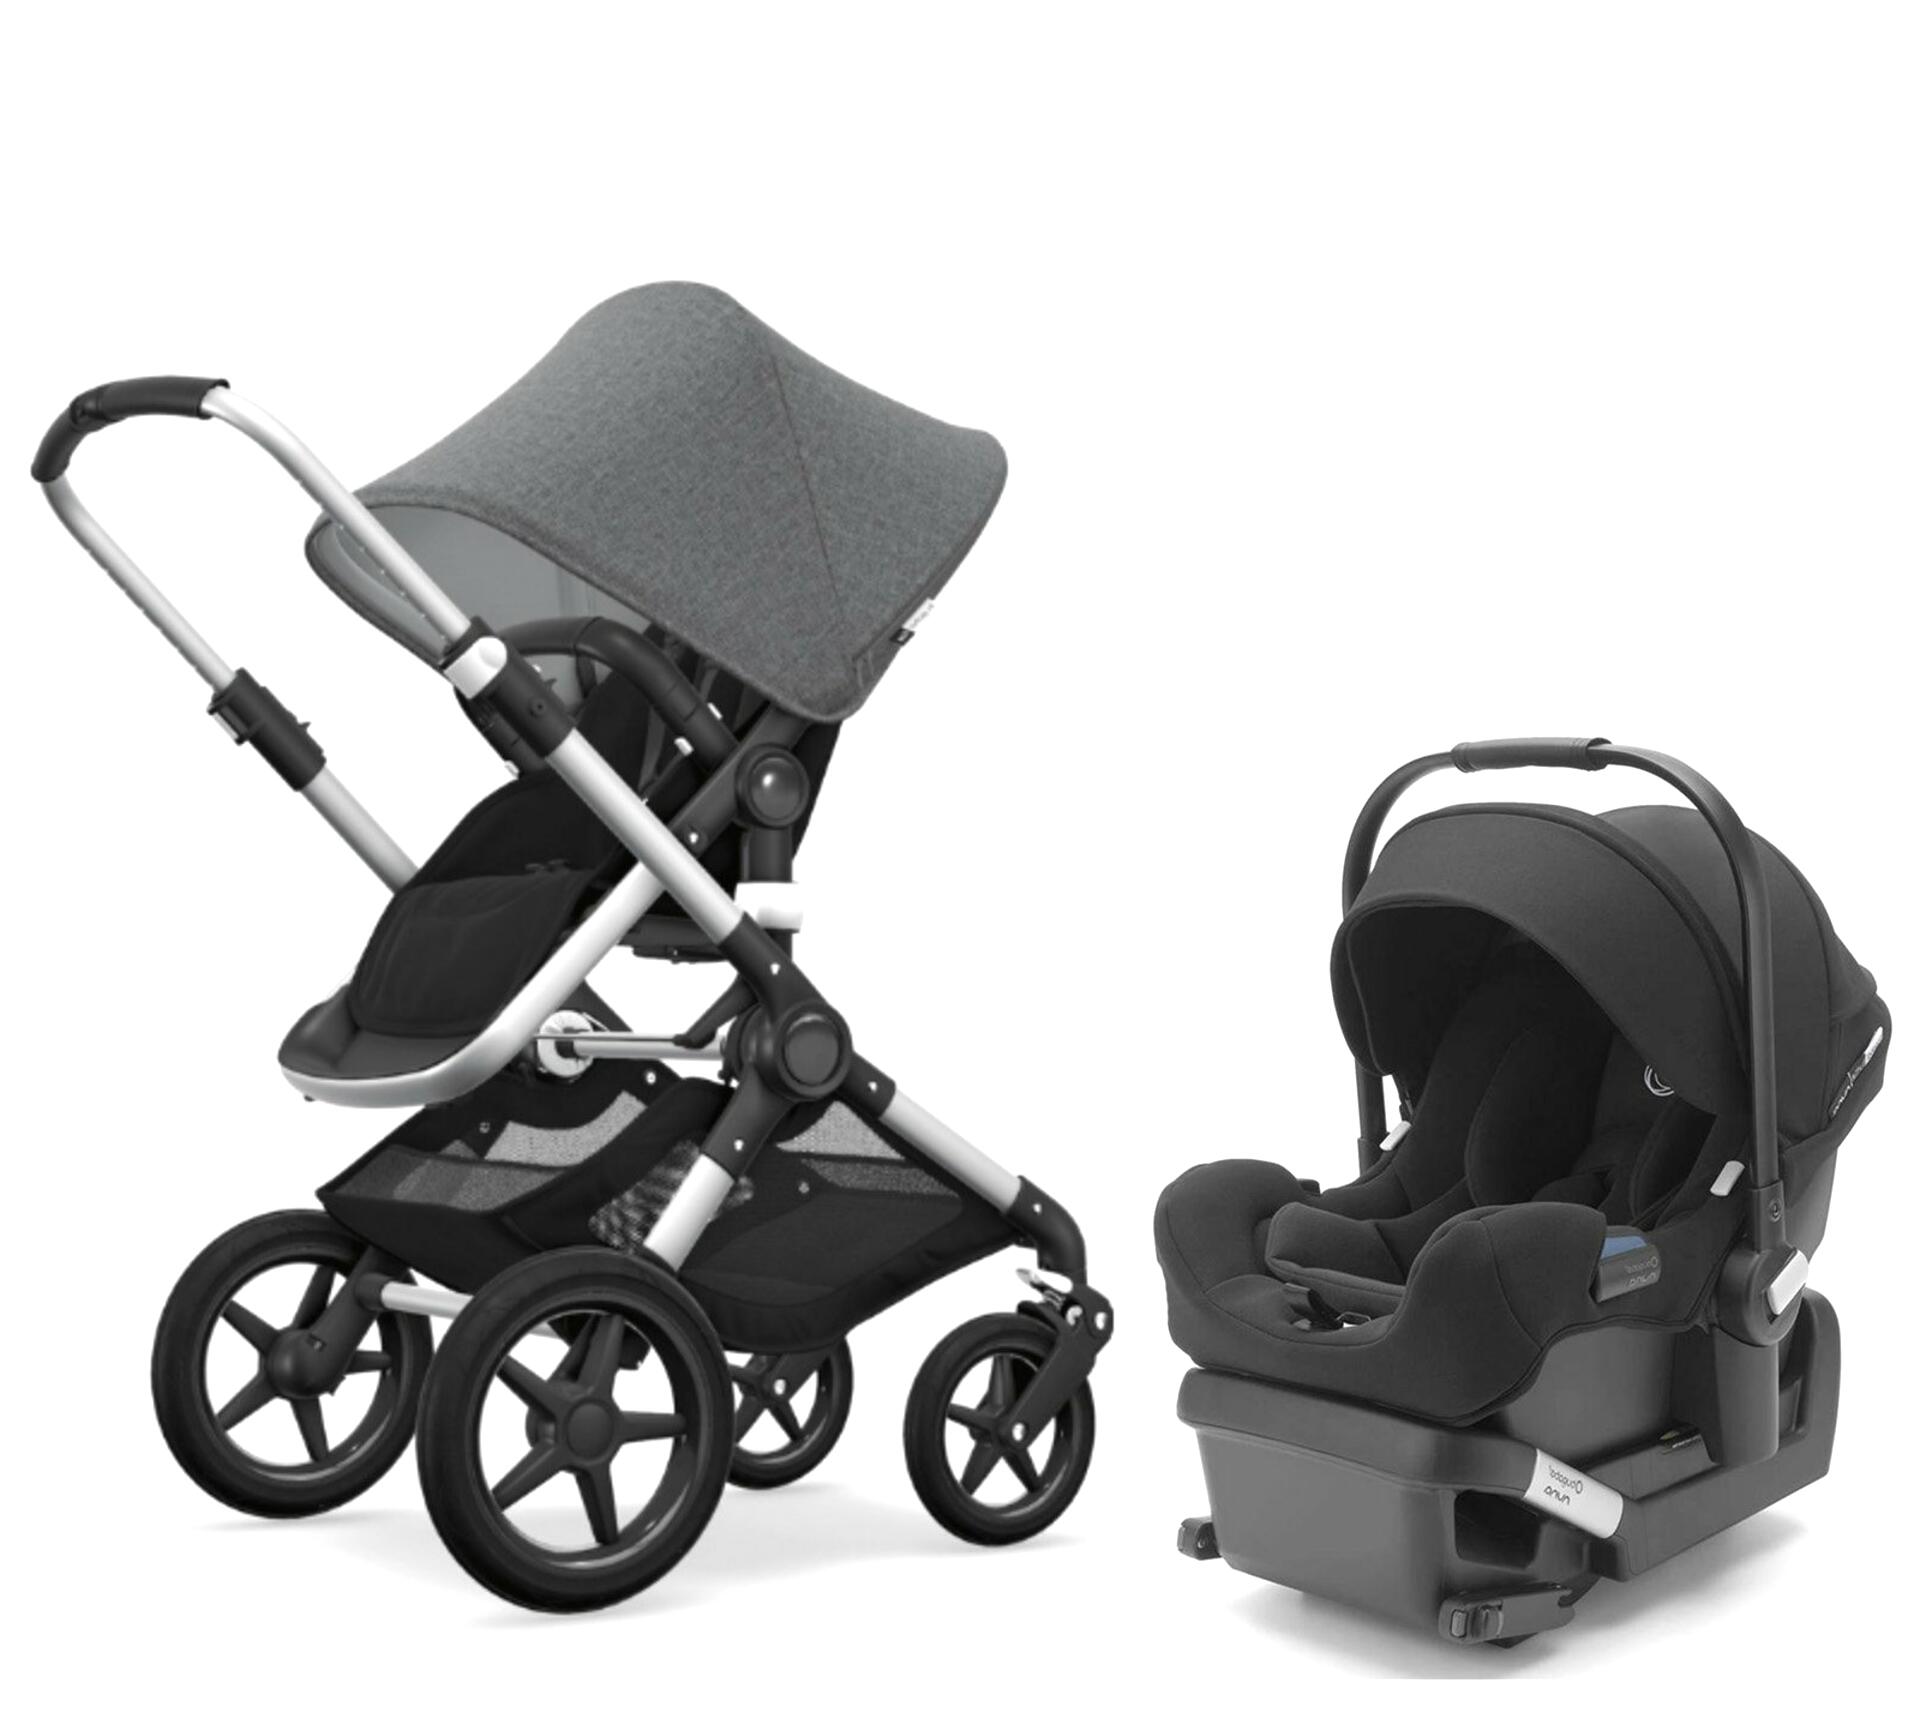 Bugaboo Travel System for sale in UK View 76 bargains